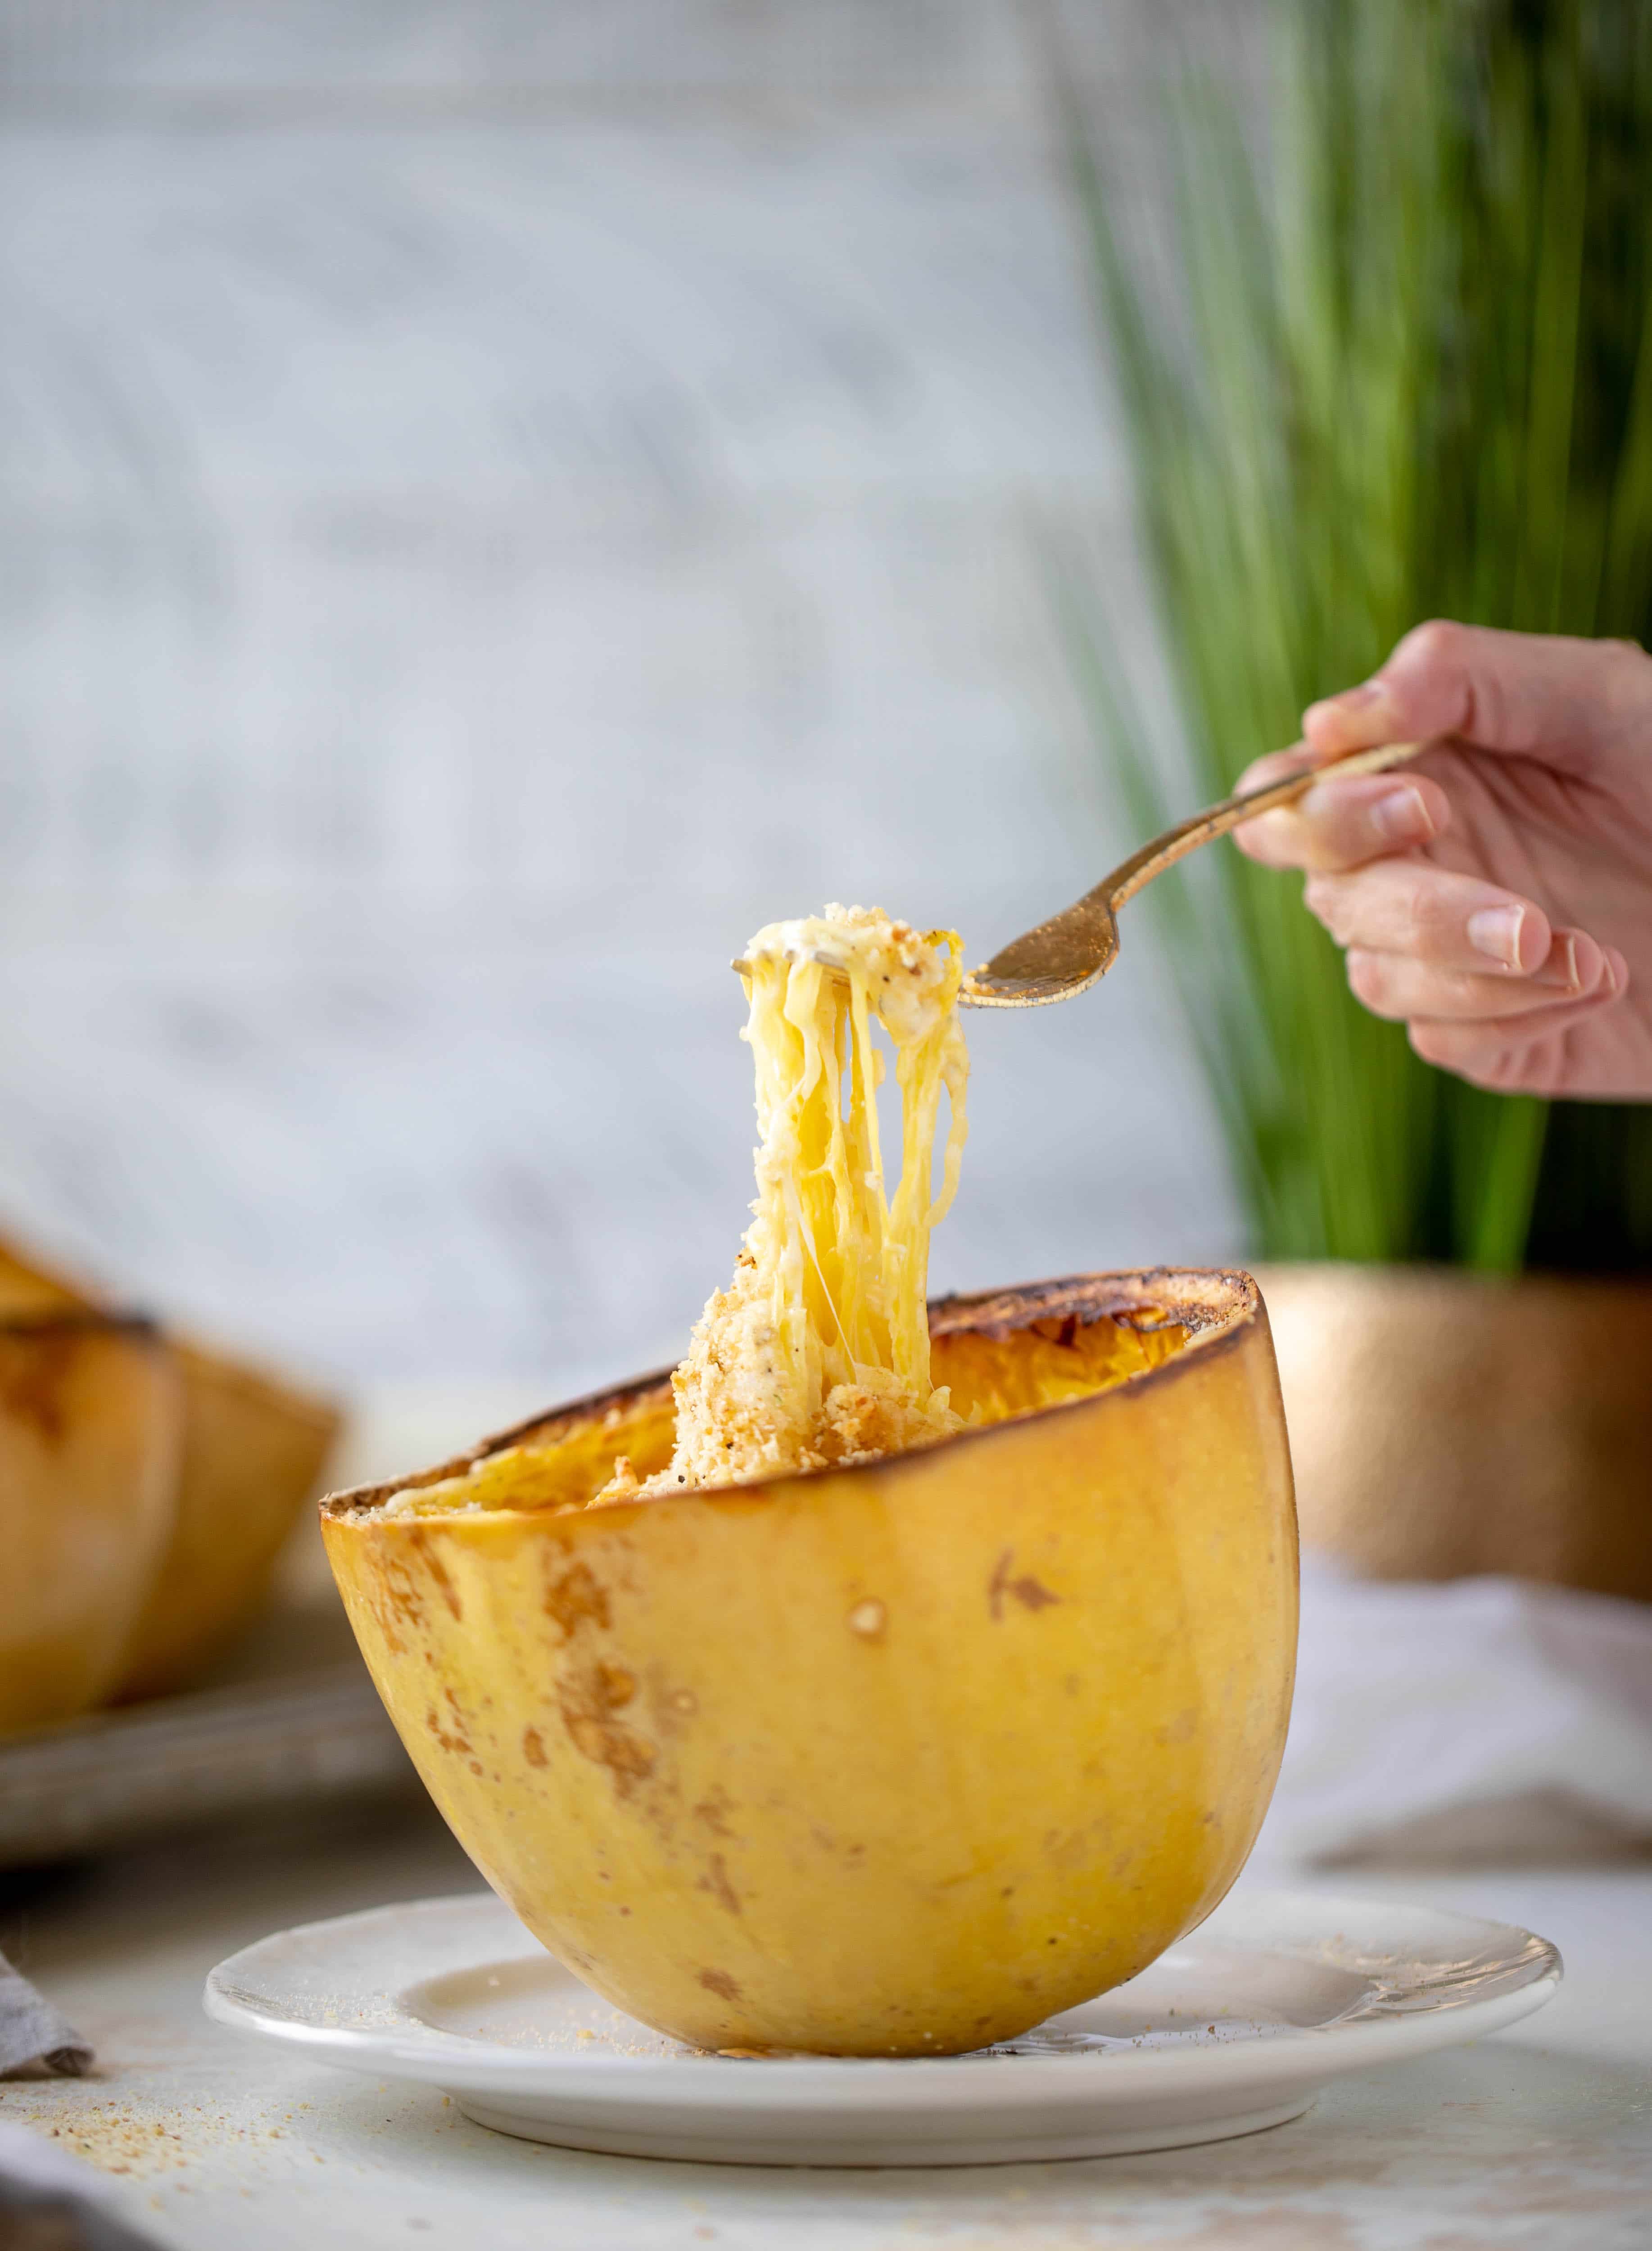 Three cheese spaghetti squash in a squash bowl! Squash tossed with fontina, gruyere and parmesan to make a creamy comforting meal.